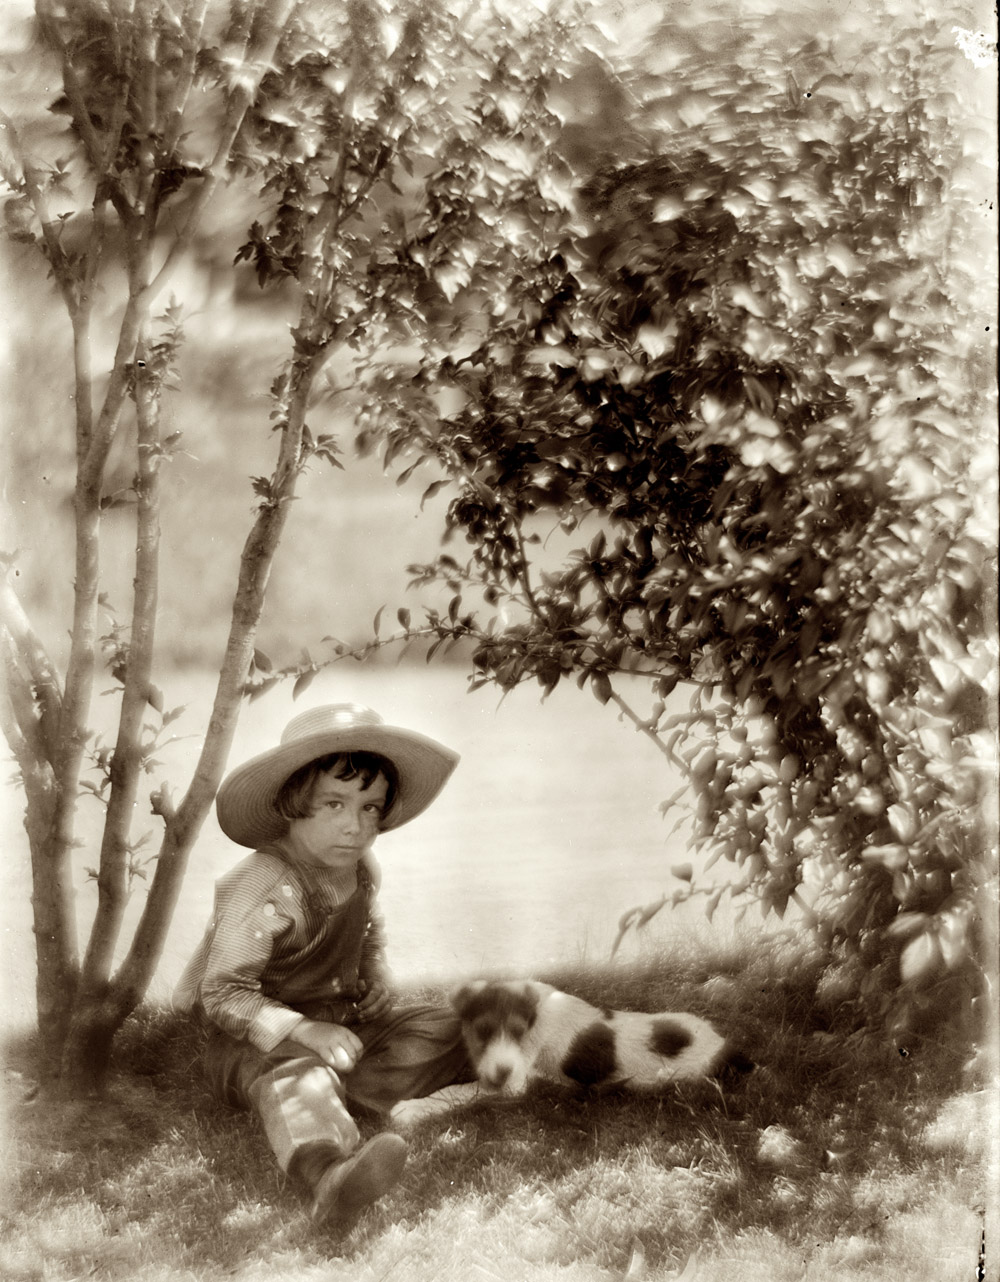 1904. "Boy with dog." Oceanside, Long Island. 8x10 dry plate glass negative by the pioneering portrait photographer Gertrude Käsebier. View full size.